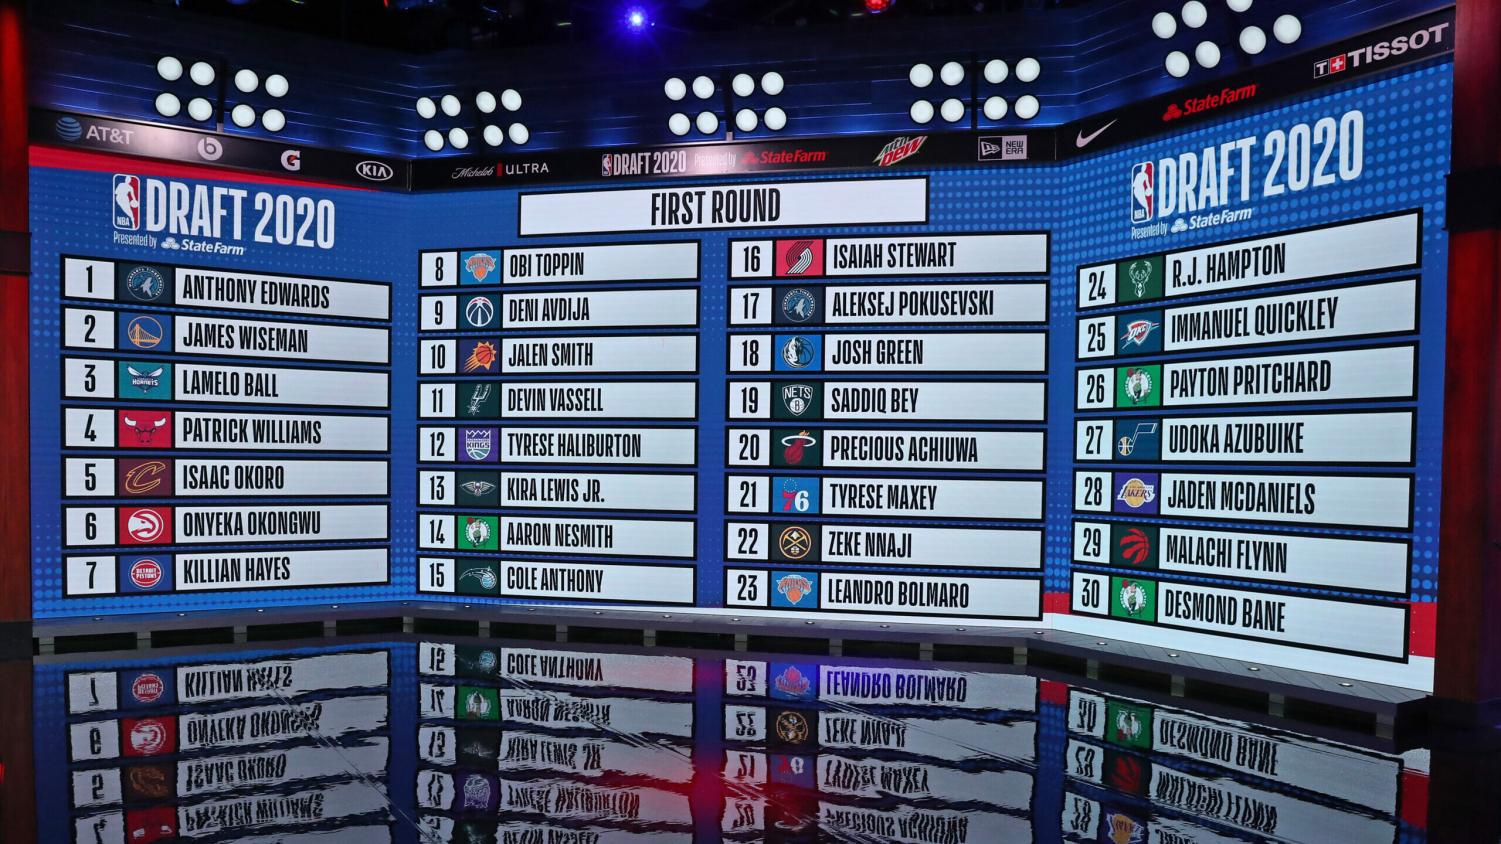 Sixers pick Tyrese Maxey at No. 21 in 2020 NBA draft, trade Al Horford and Josh  Richardson for Danny Green and Seth Curry